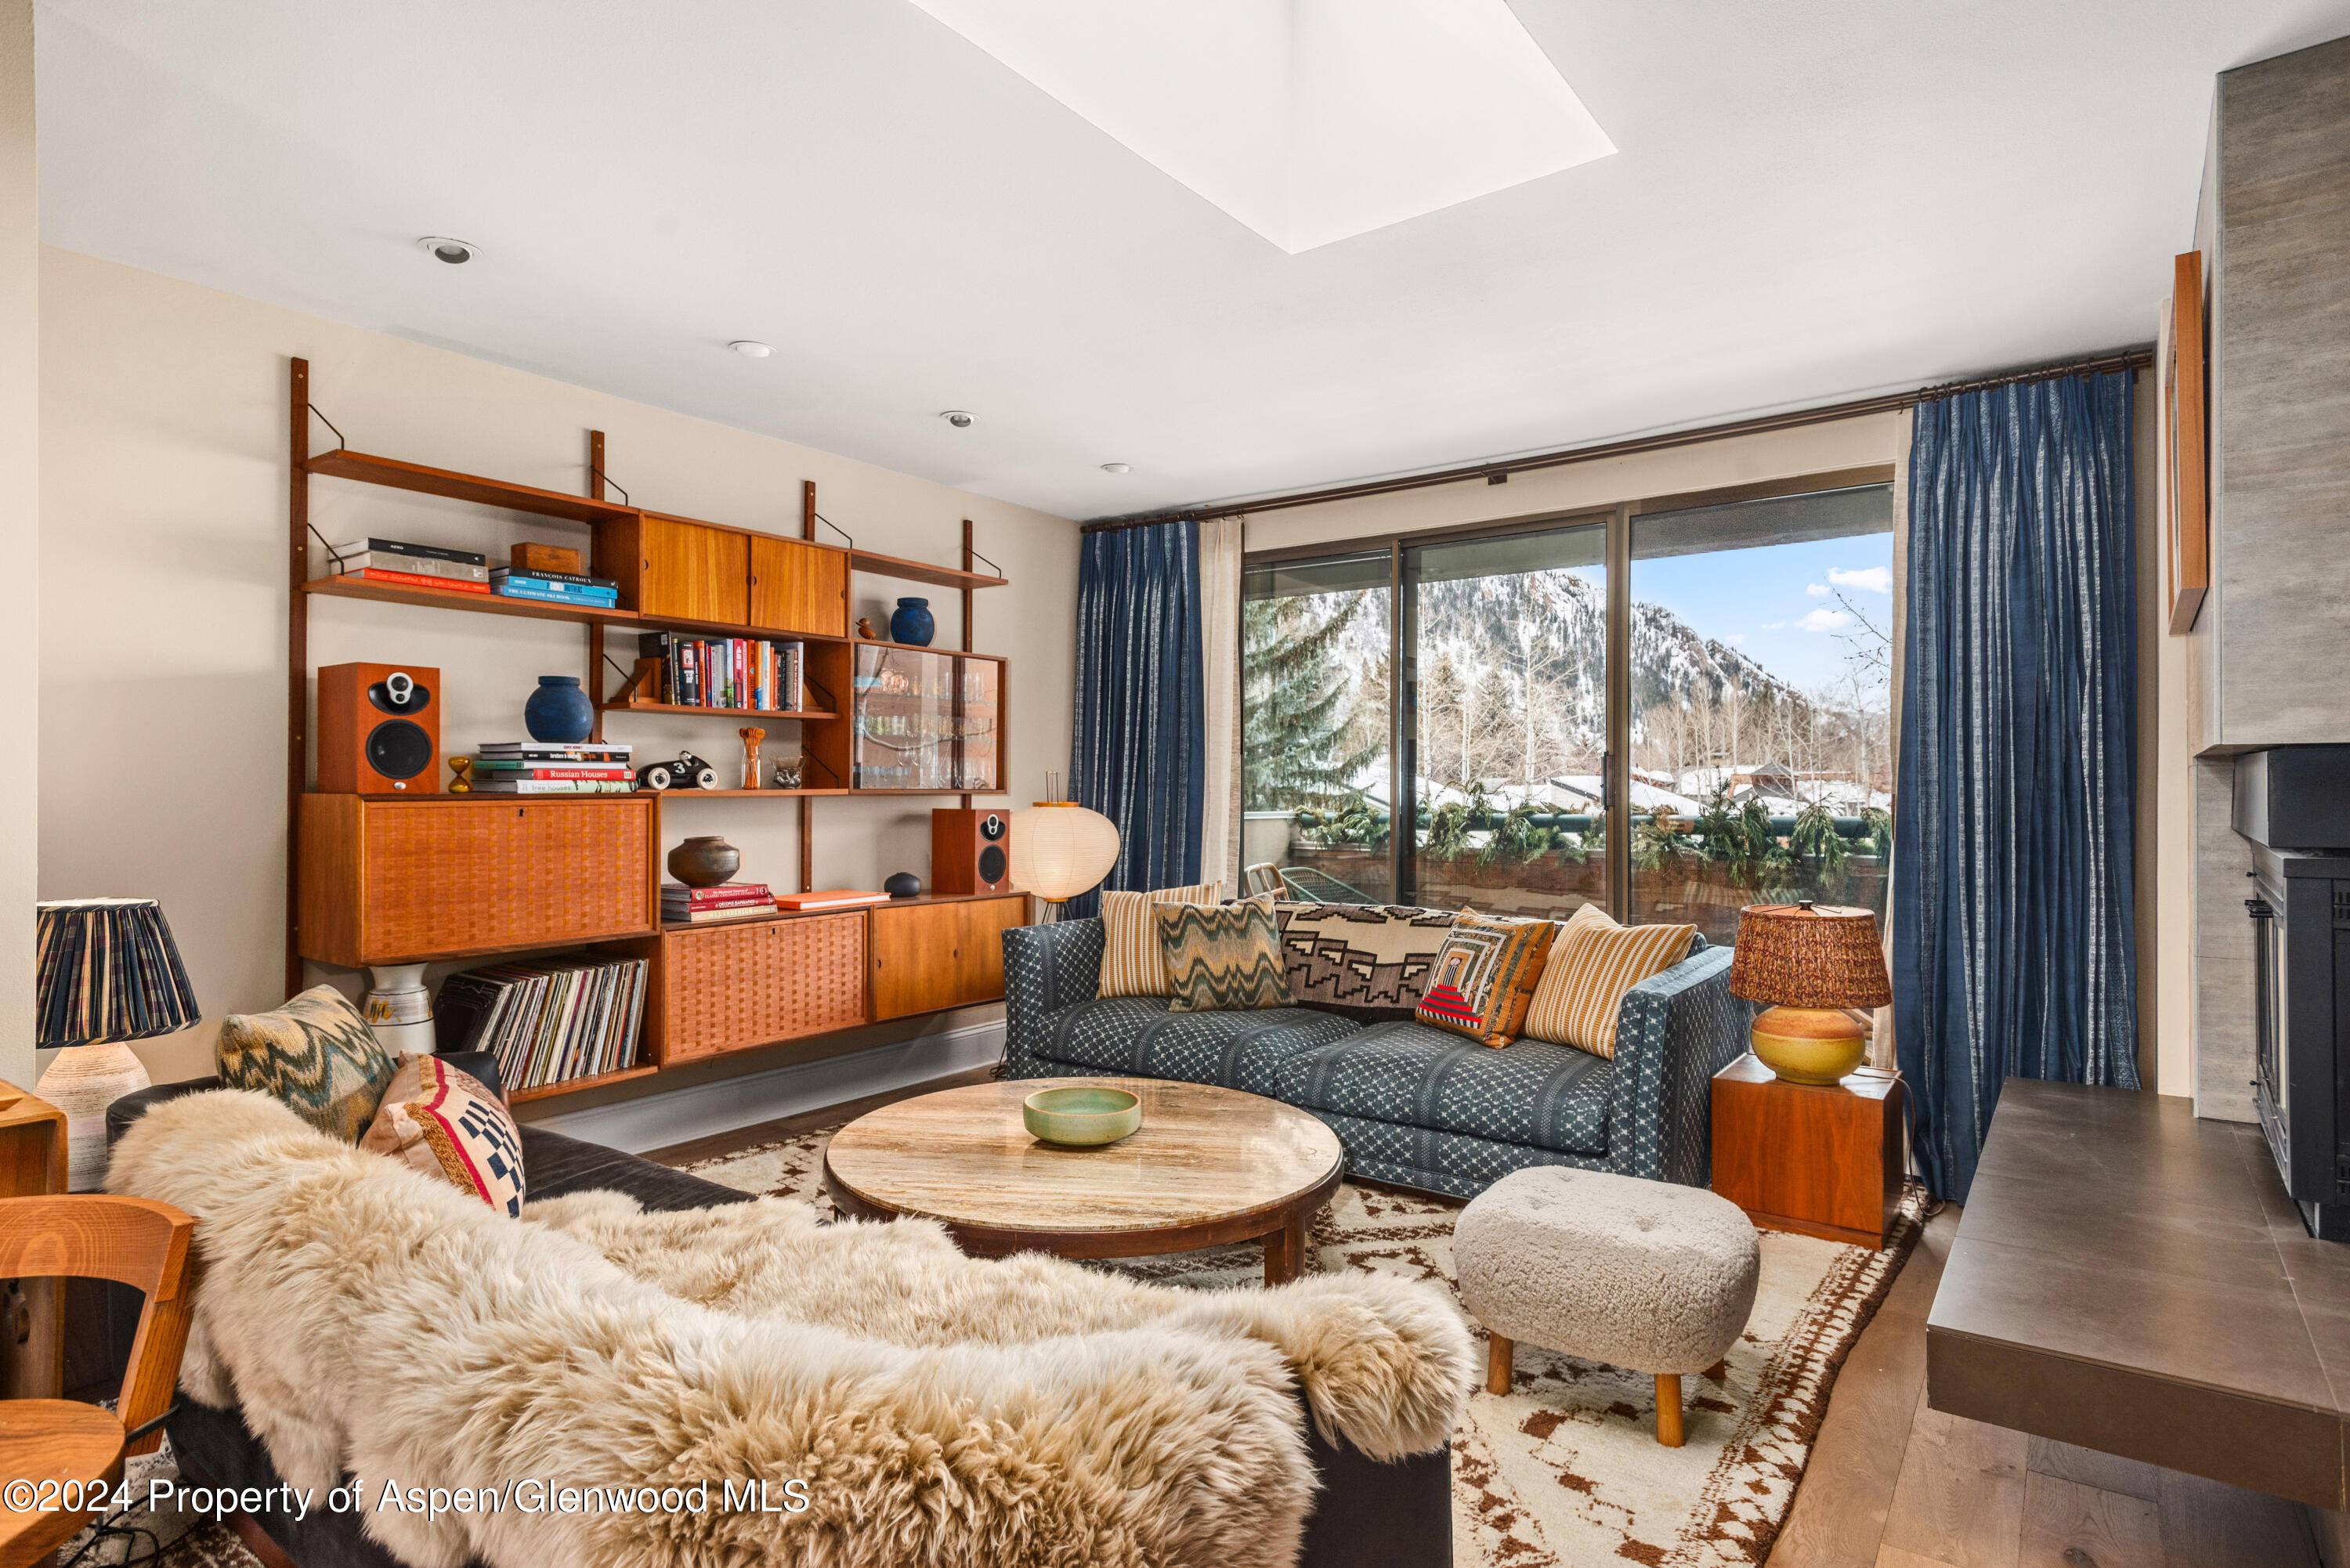 Unusual for Aspen, this property is flanked by the Roaring Fork River, while pointing directly at Aspen Mountain, offering both river and mountain views.